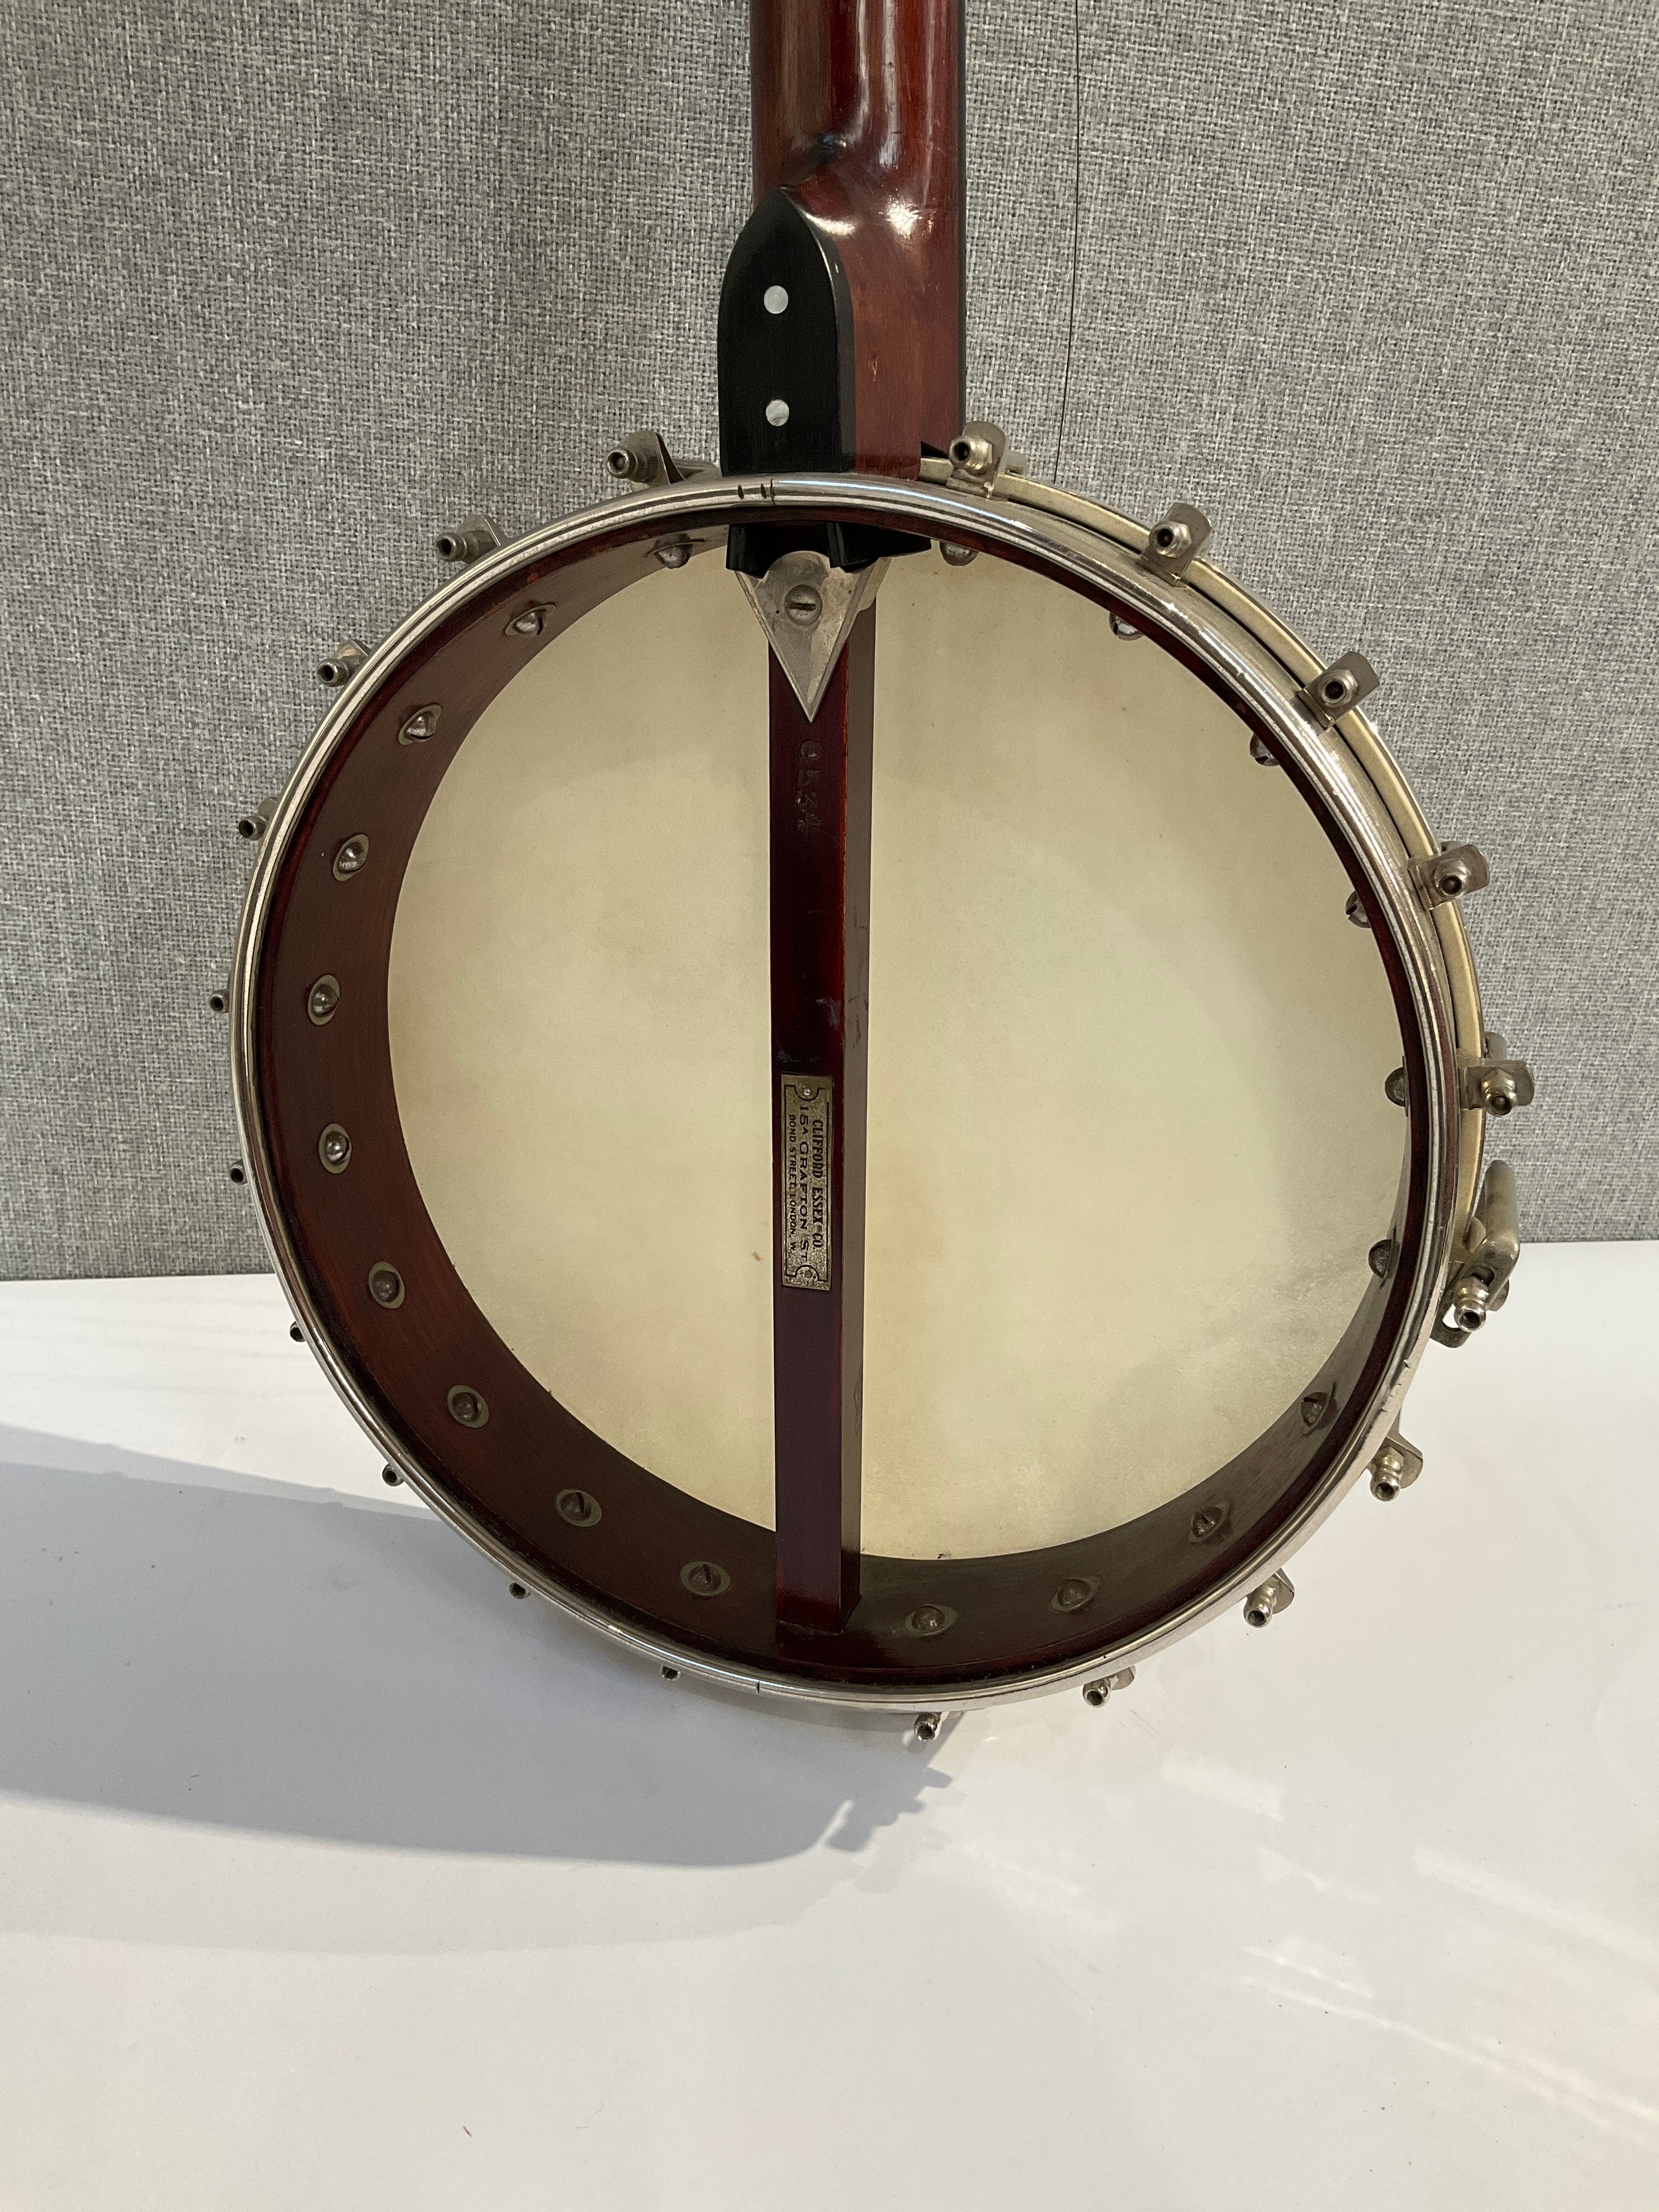 A Clifford Essex Co. Of Bond Street, London banjo circa 1910-20, open back with mother of pearl - Image 5 of 5